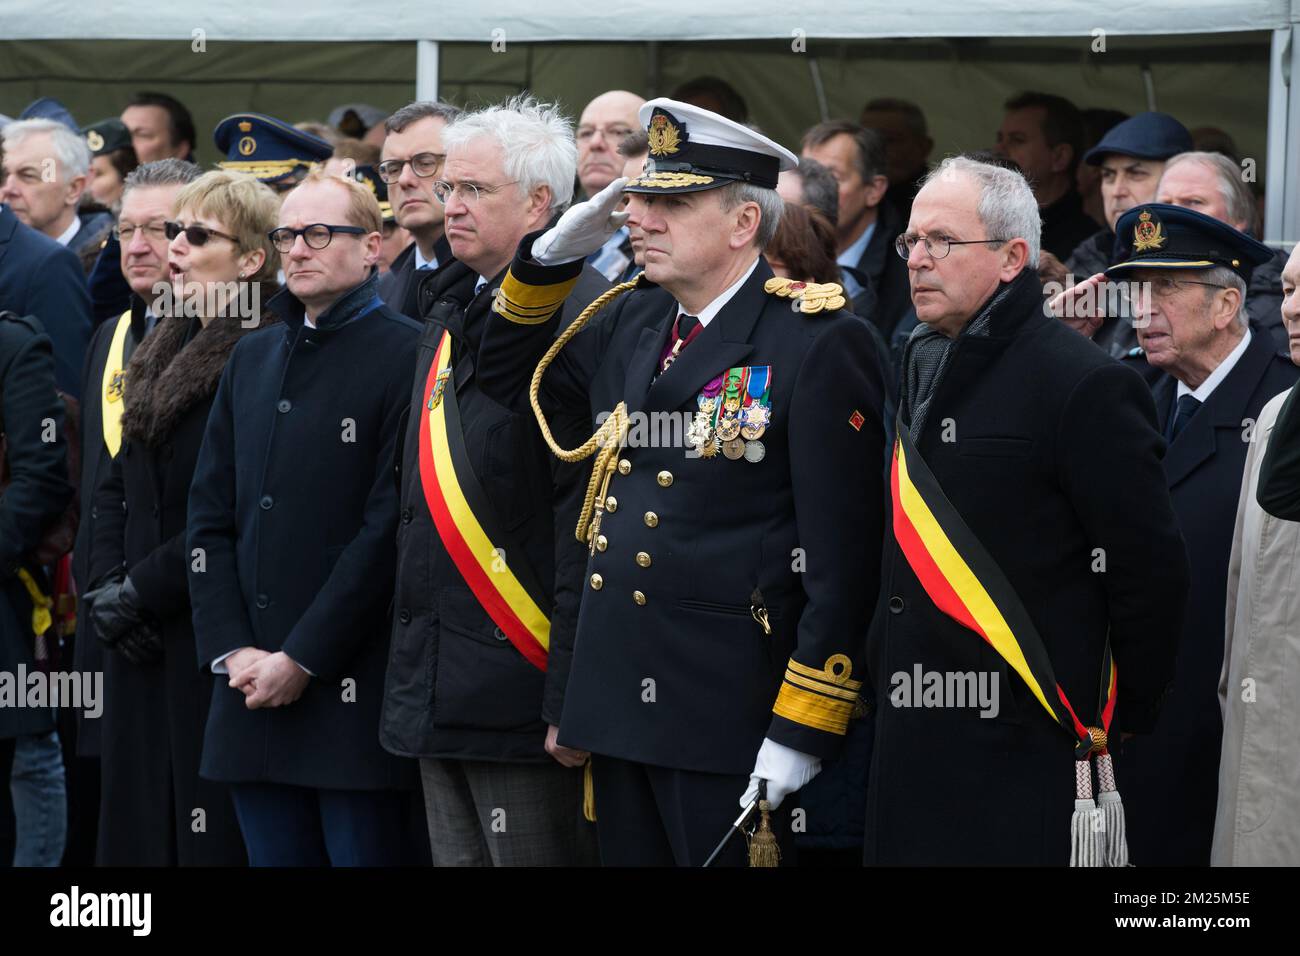 UK ambassador in Belgium, Alison Rose, West-Flanders province governor Carl Decaluwe, Rear Admiral Michel Hofman and Brugge's Mayor Renaat Landuyt pictured during a tribute ceremony for the 30th anniversary of the Herald of Free Enterprise ferry disaster, on Monday 06 March 2017 in Zeebrugge. On 6 March 1987 the ferry left the harbor of Zeebrugge, bound for Dover with more than 450 passengers and 80 crew members on board. It capsized just outside the harbor. The disaster, which was caused by the failure to close the bow doors, cost the life of 194 people. BELGA PHOTO KURT DESPLENTER Stock Photo